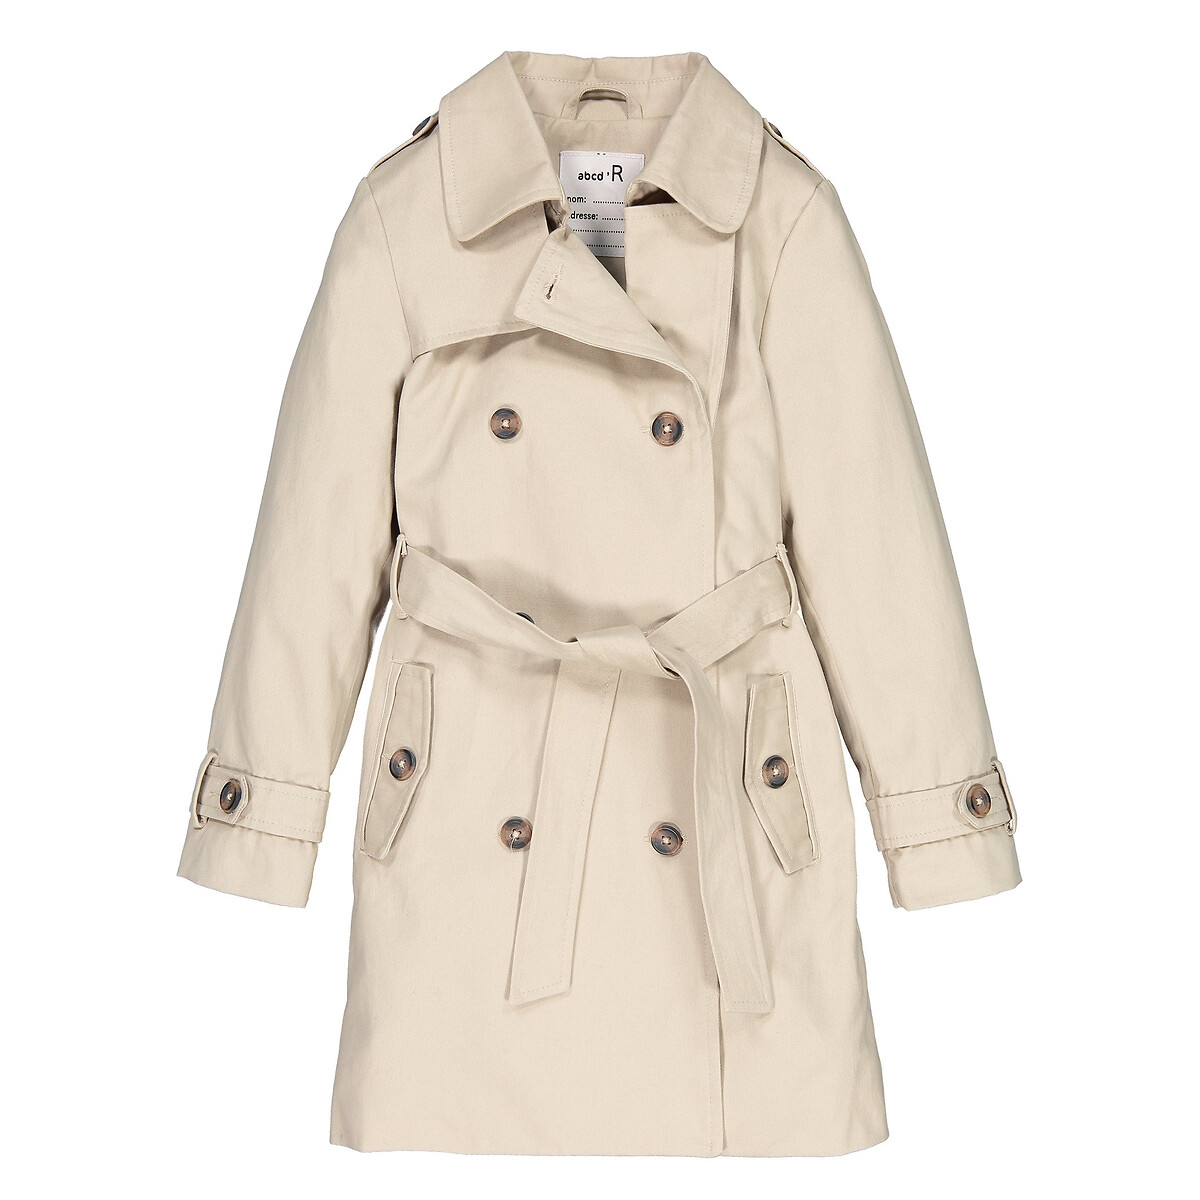 Cotton Trench Coat 3 12 Years La, Baby Girl Trench Coat 3 6 Months